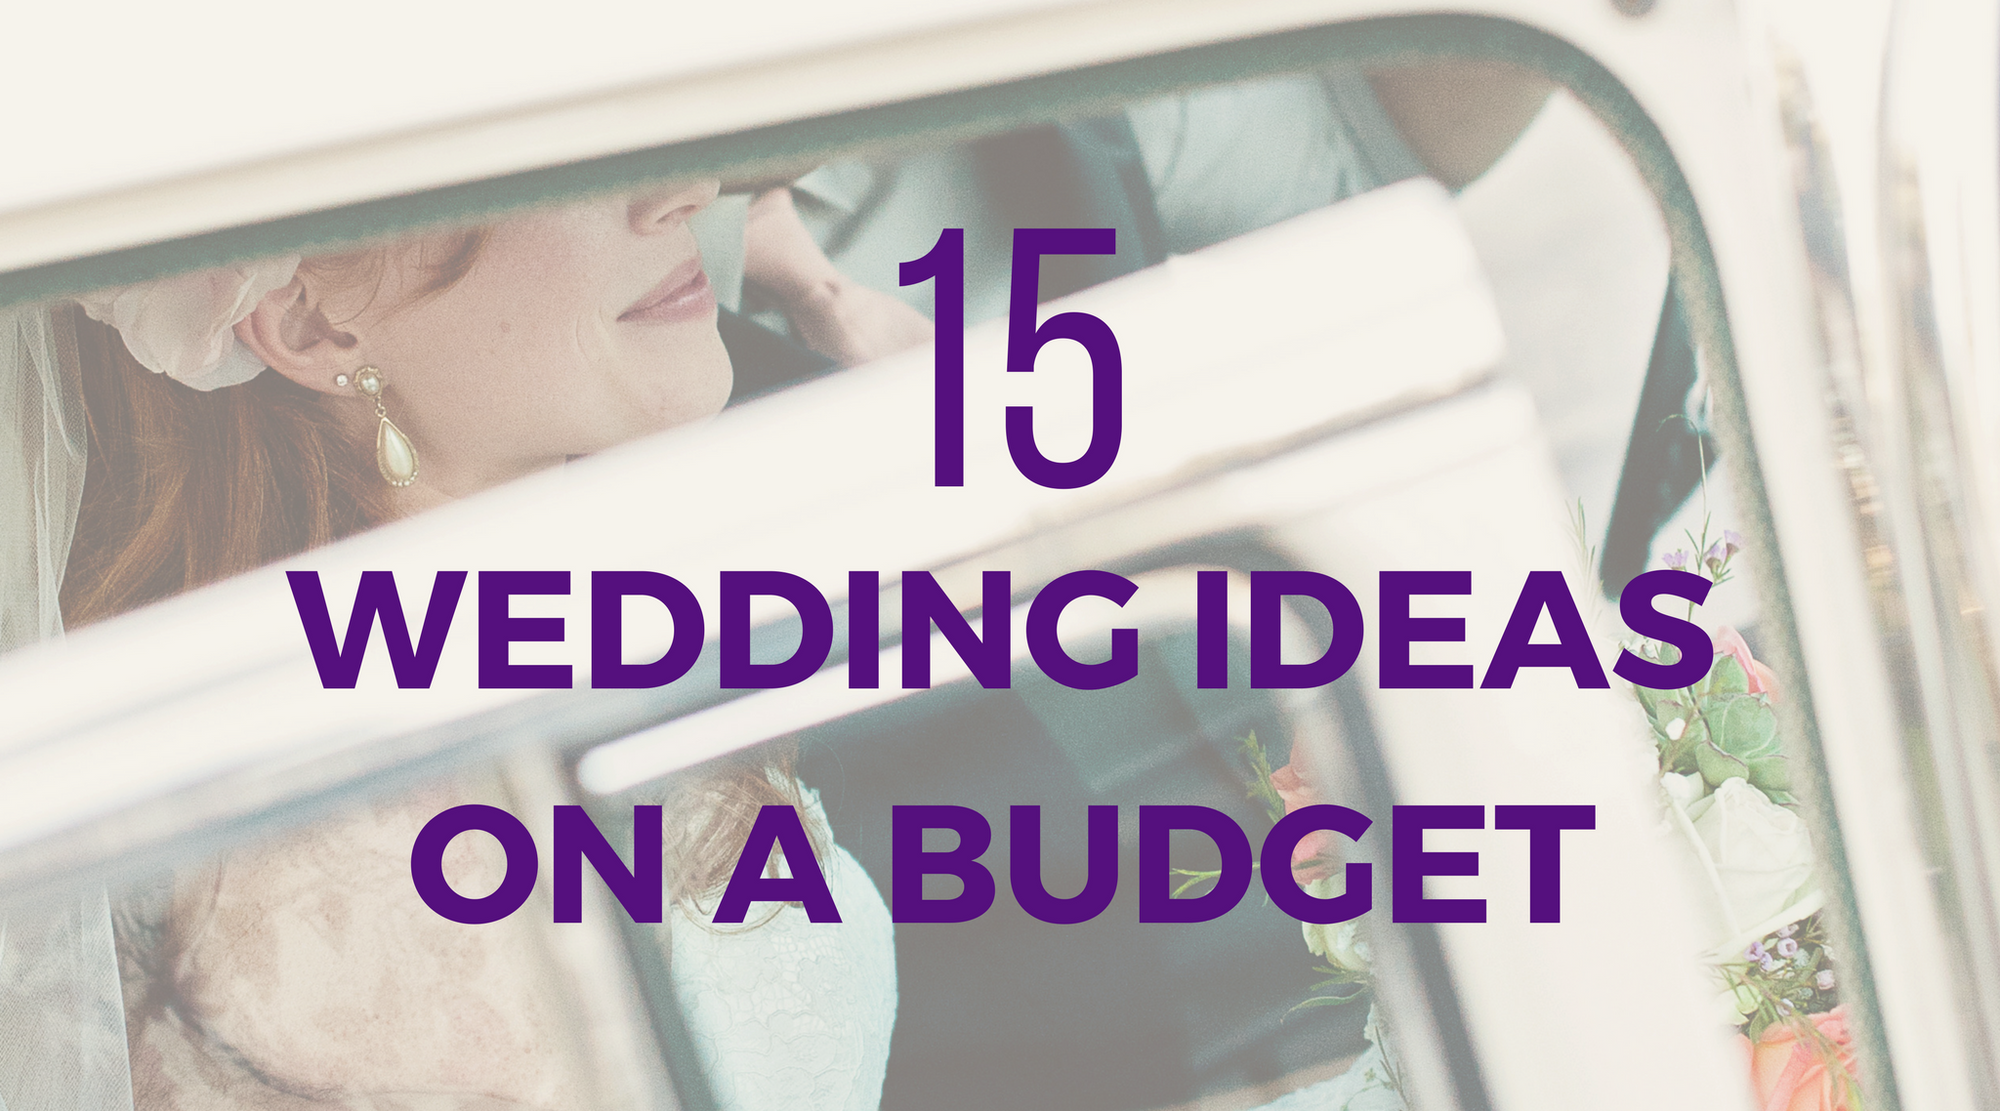 15 Simple and Elegant DIY Wedding Ideas on a Budget: Have the extravagant and lavish wedding of your dreams and stay within budget. These days, weddings are trending towards unique, rustic, vintage, country, and simple – perfect for the bride on a budget.